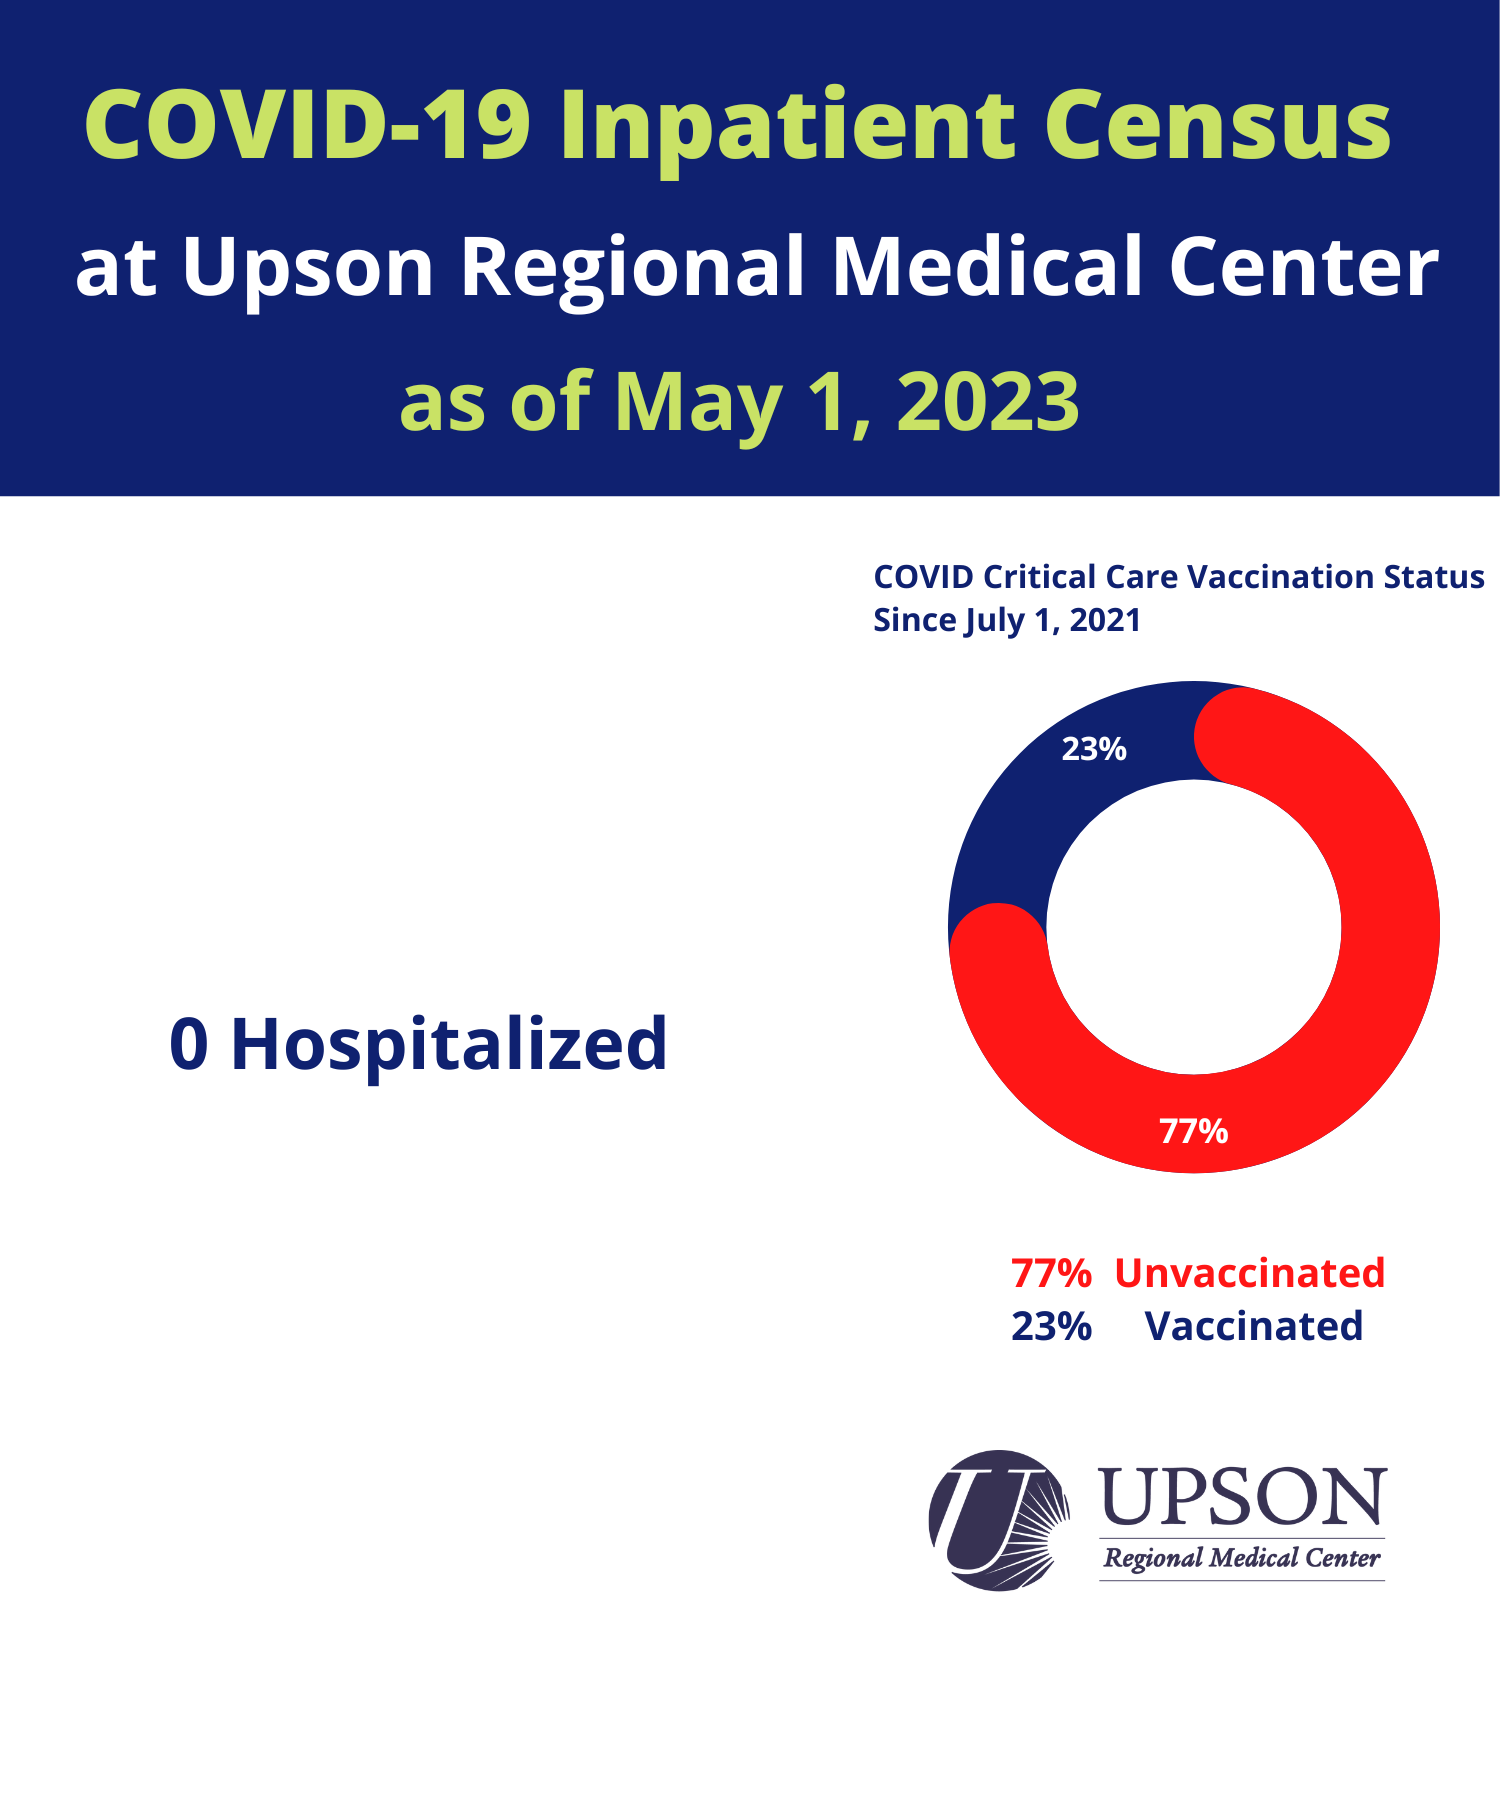 Photo for URMC COVID-19 inpatient status as of May 1, 2023.